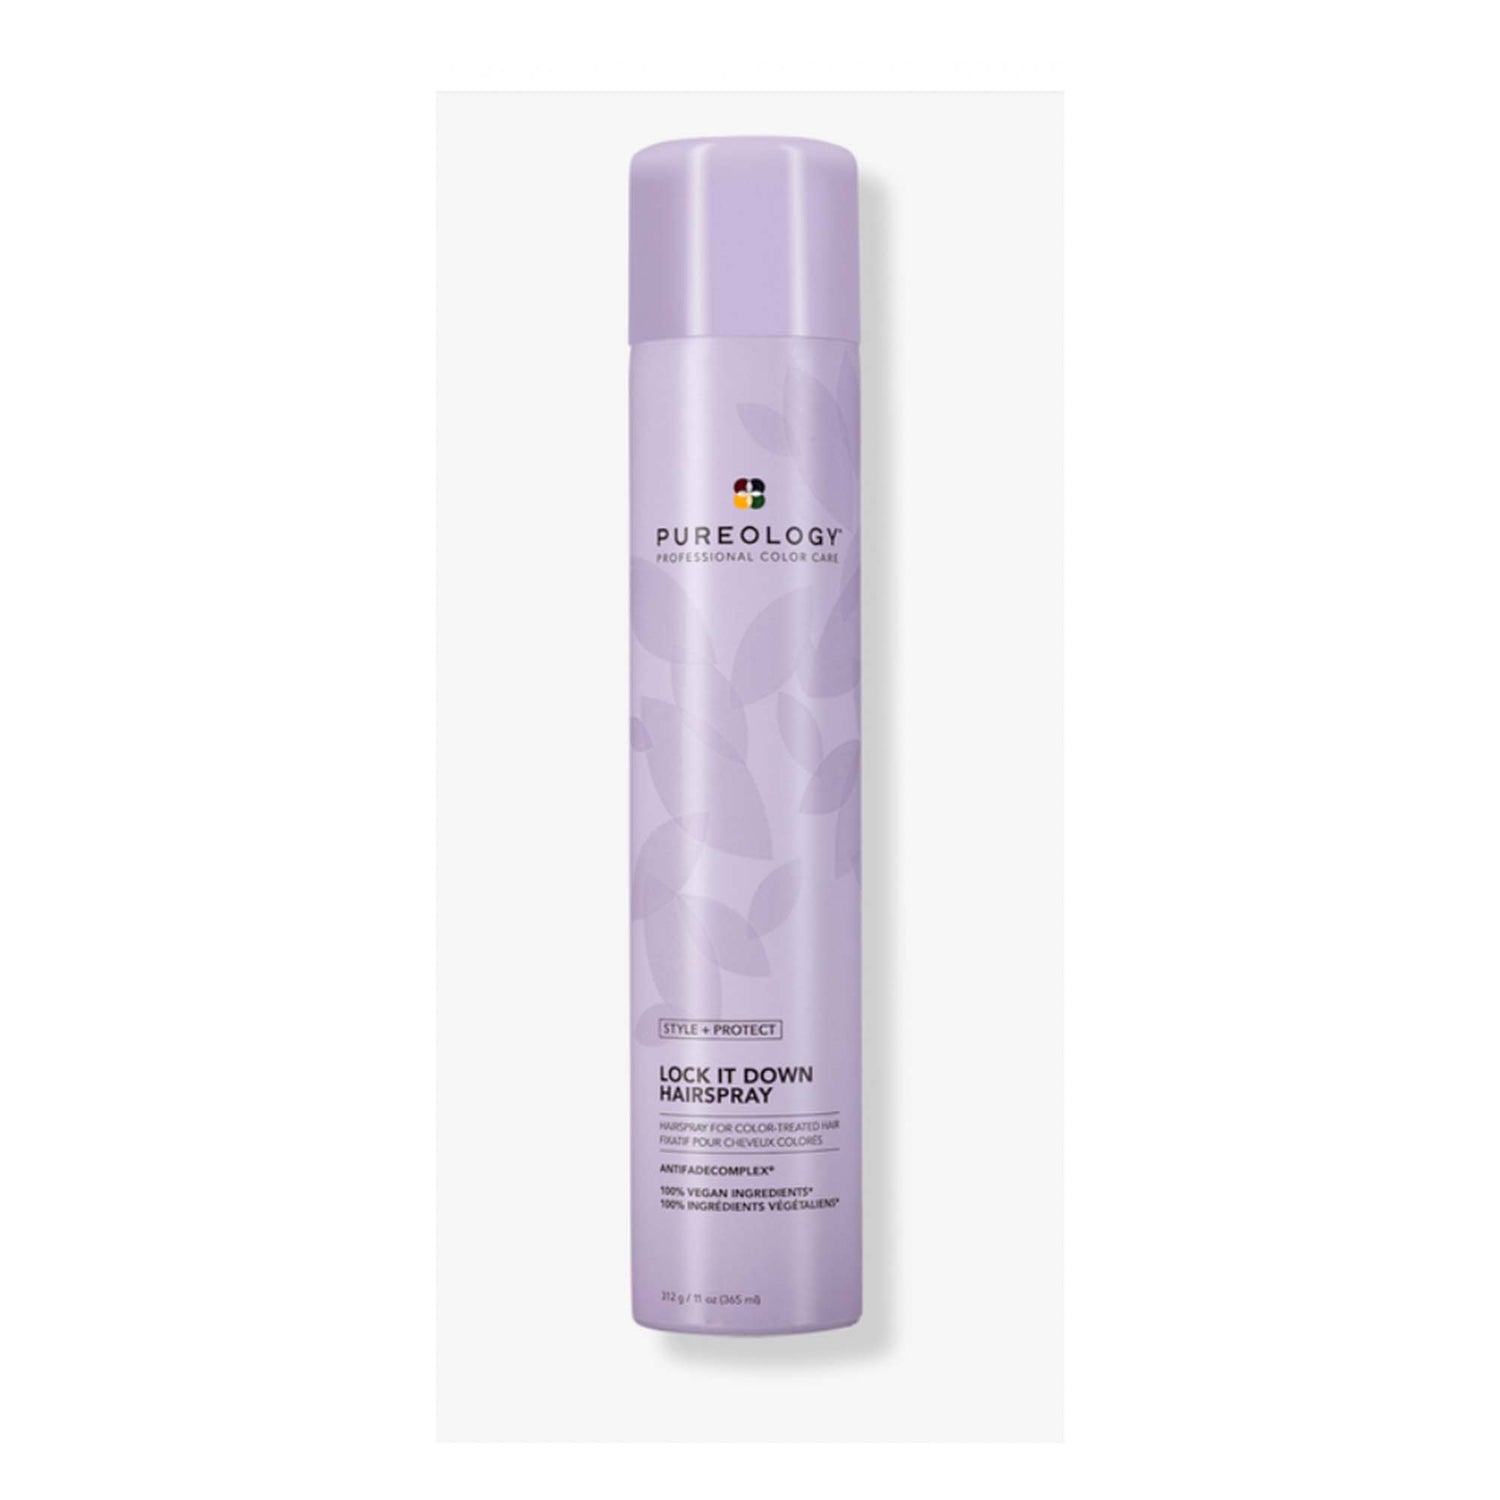 Pureology Style+Protect Lock It Down Hairspray